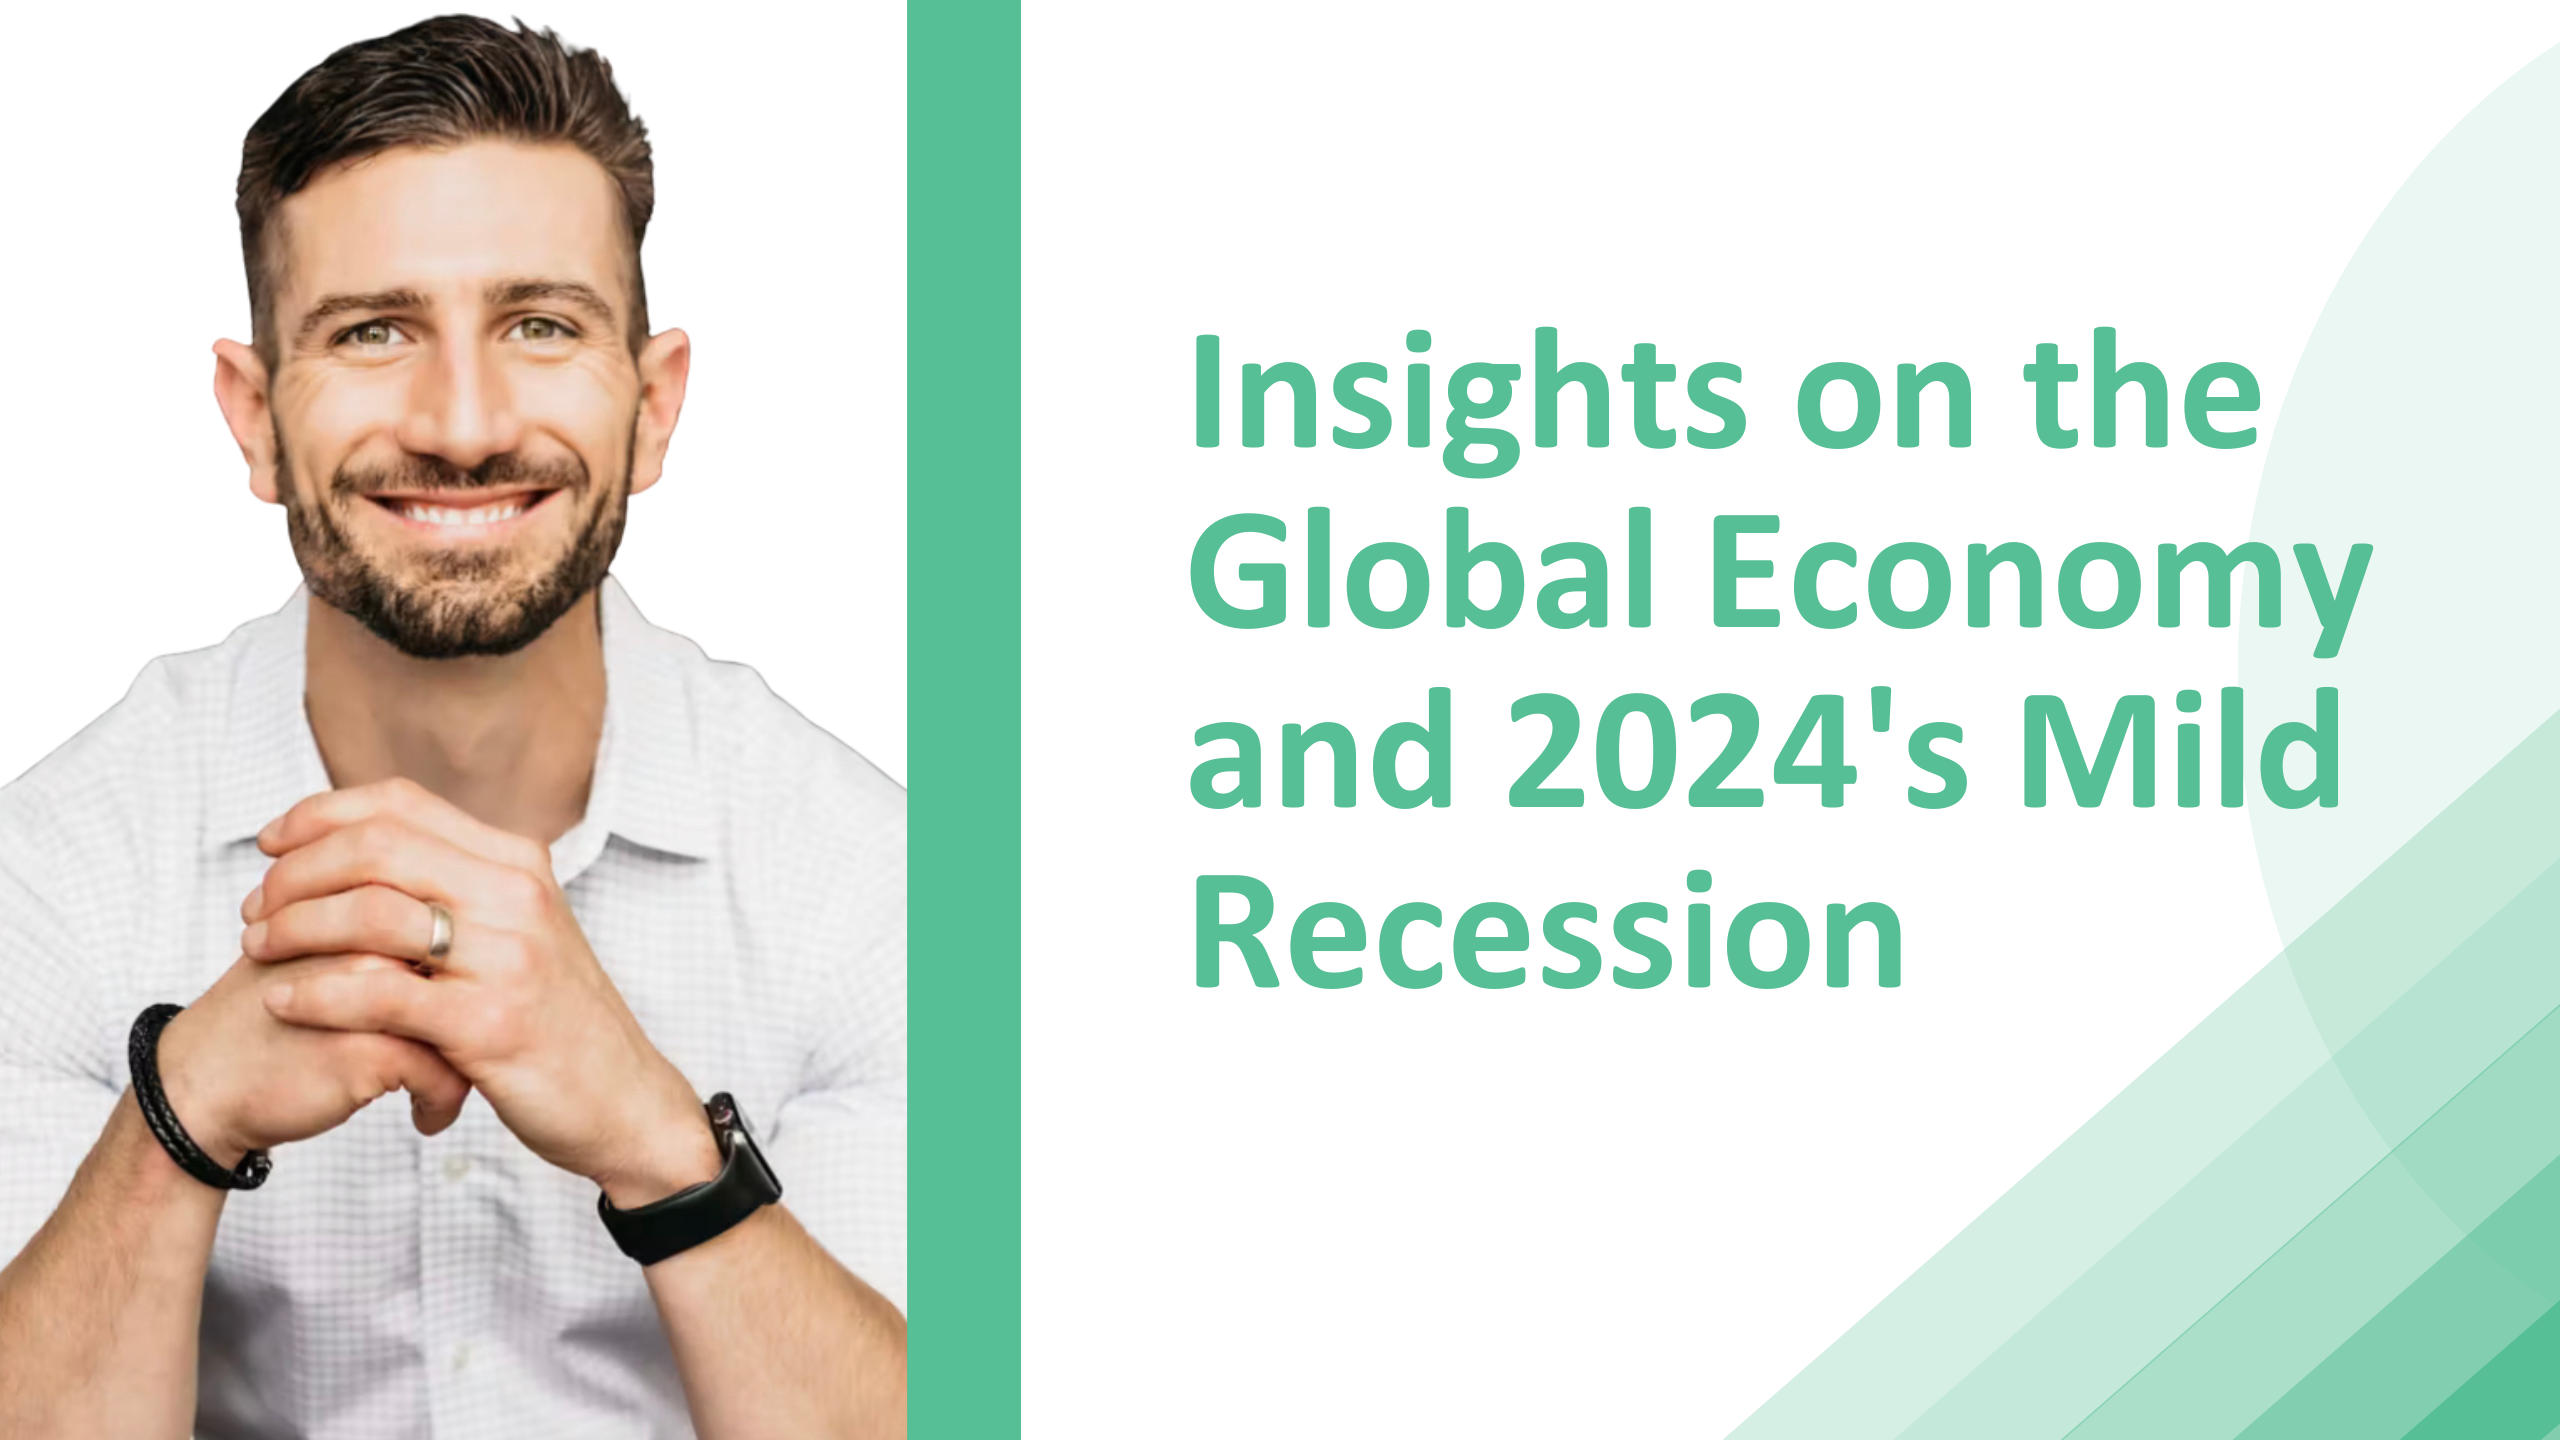 Insights on the Global Economy and 2024's Mild Recession